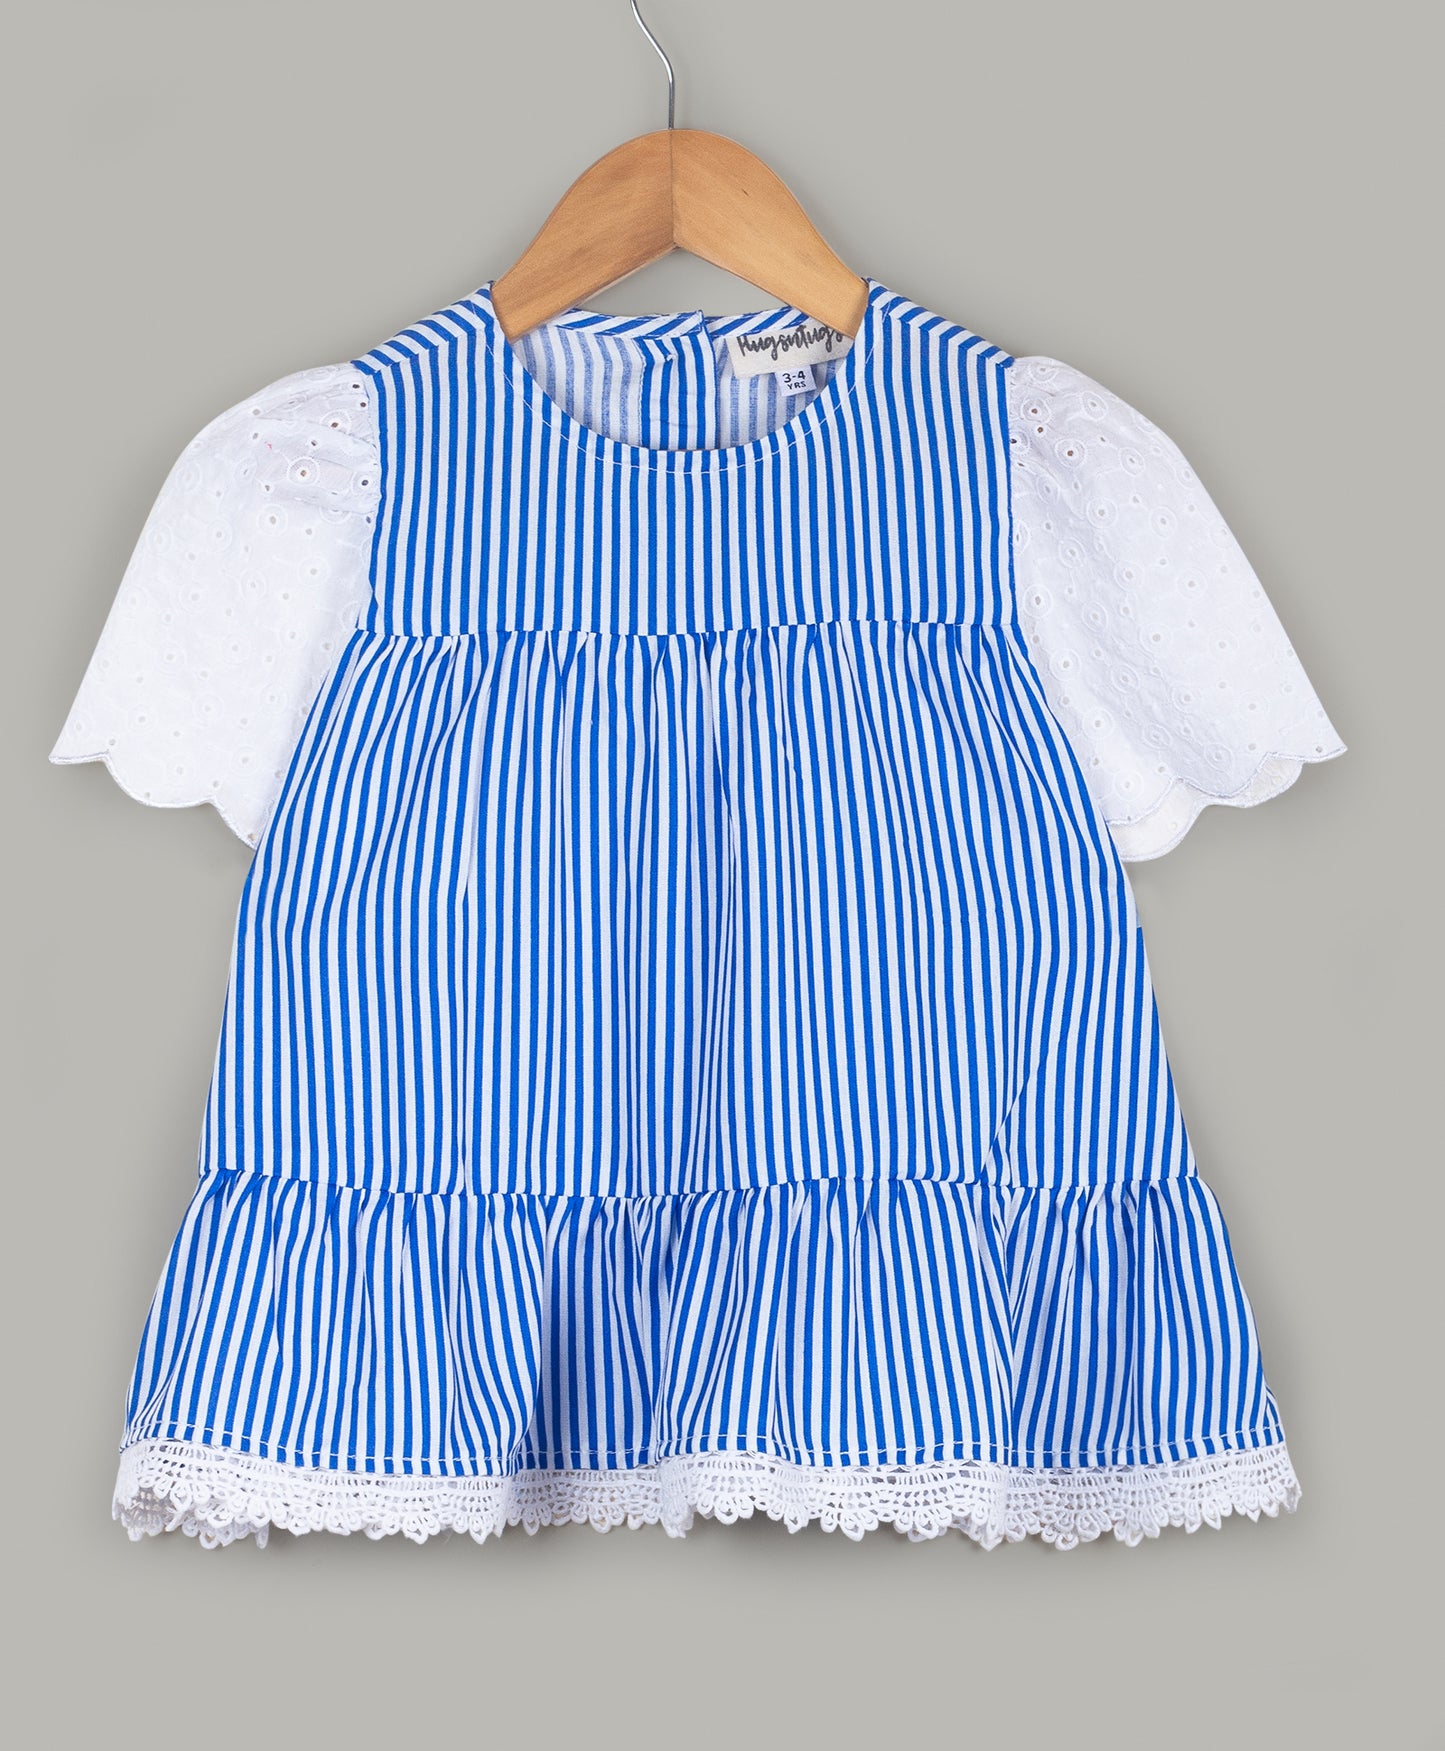 Stripe panelled top with schiffli sleeves